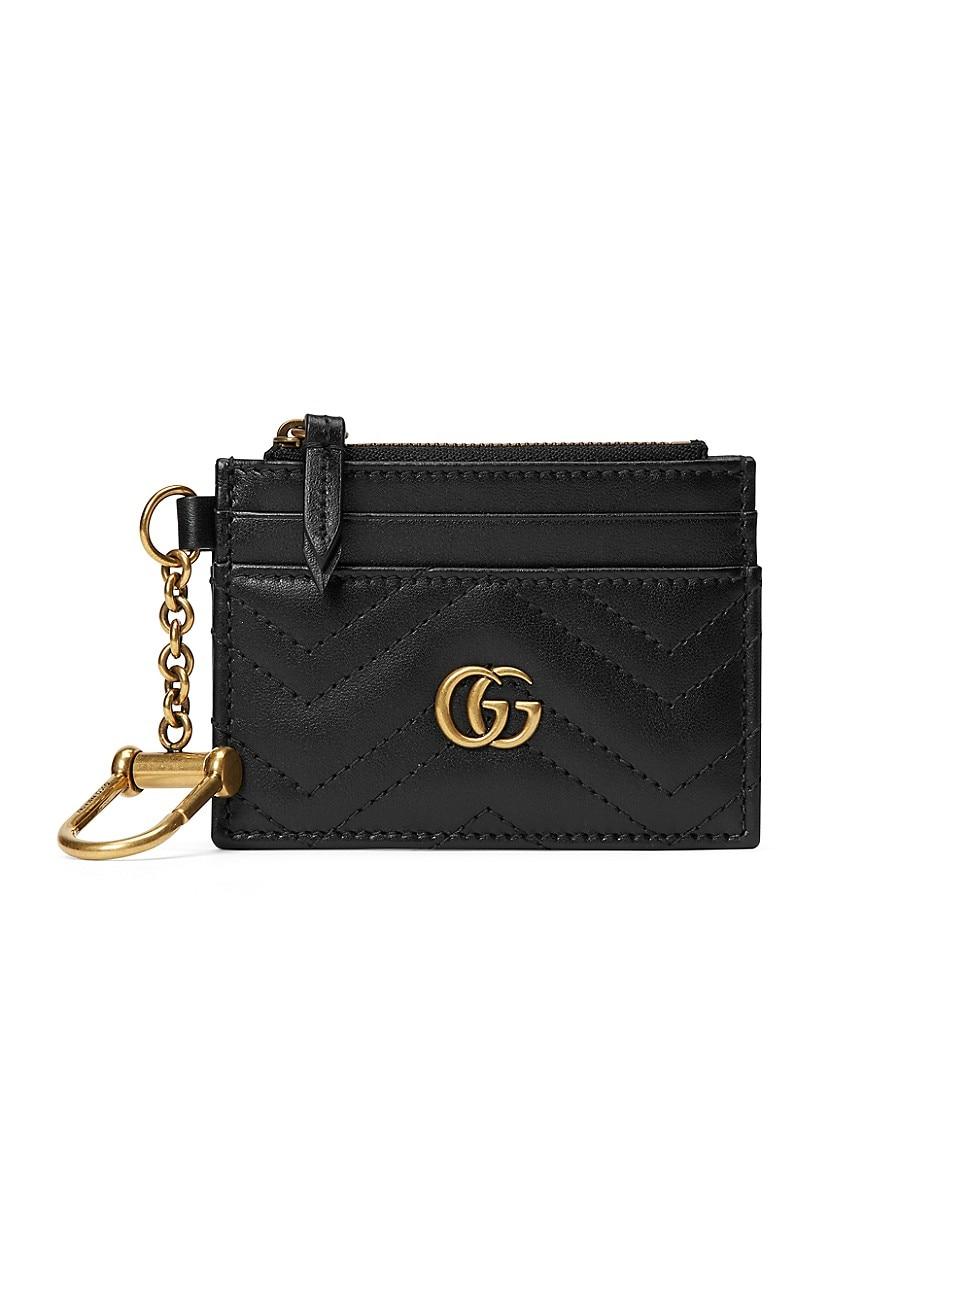 Gucci Leather GG Marmont Key Chain Wallet in Nero (Black) - Lyst